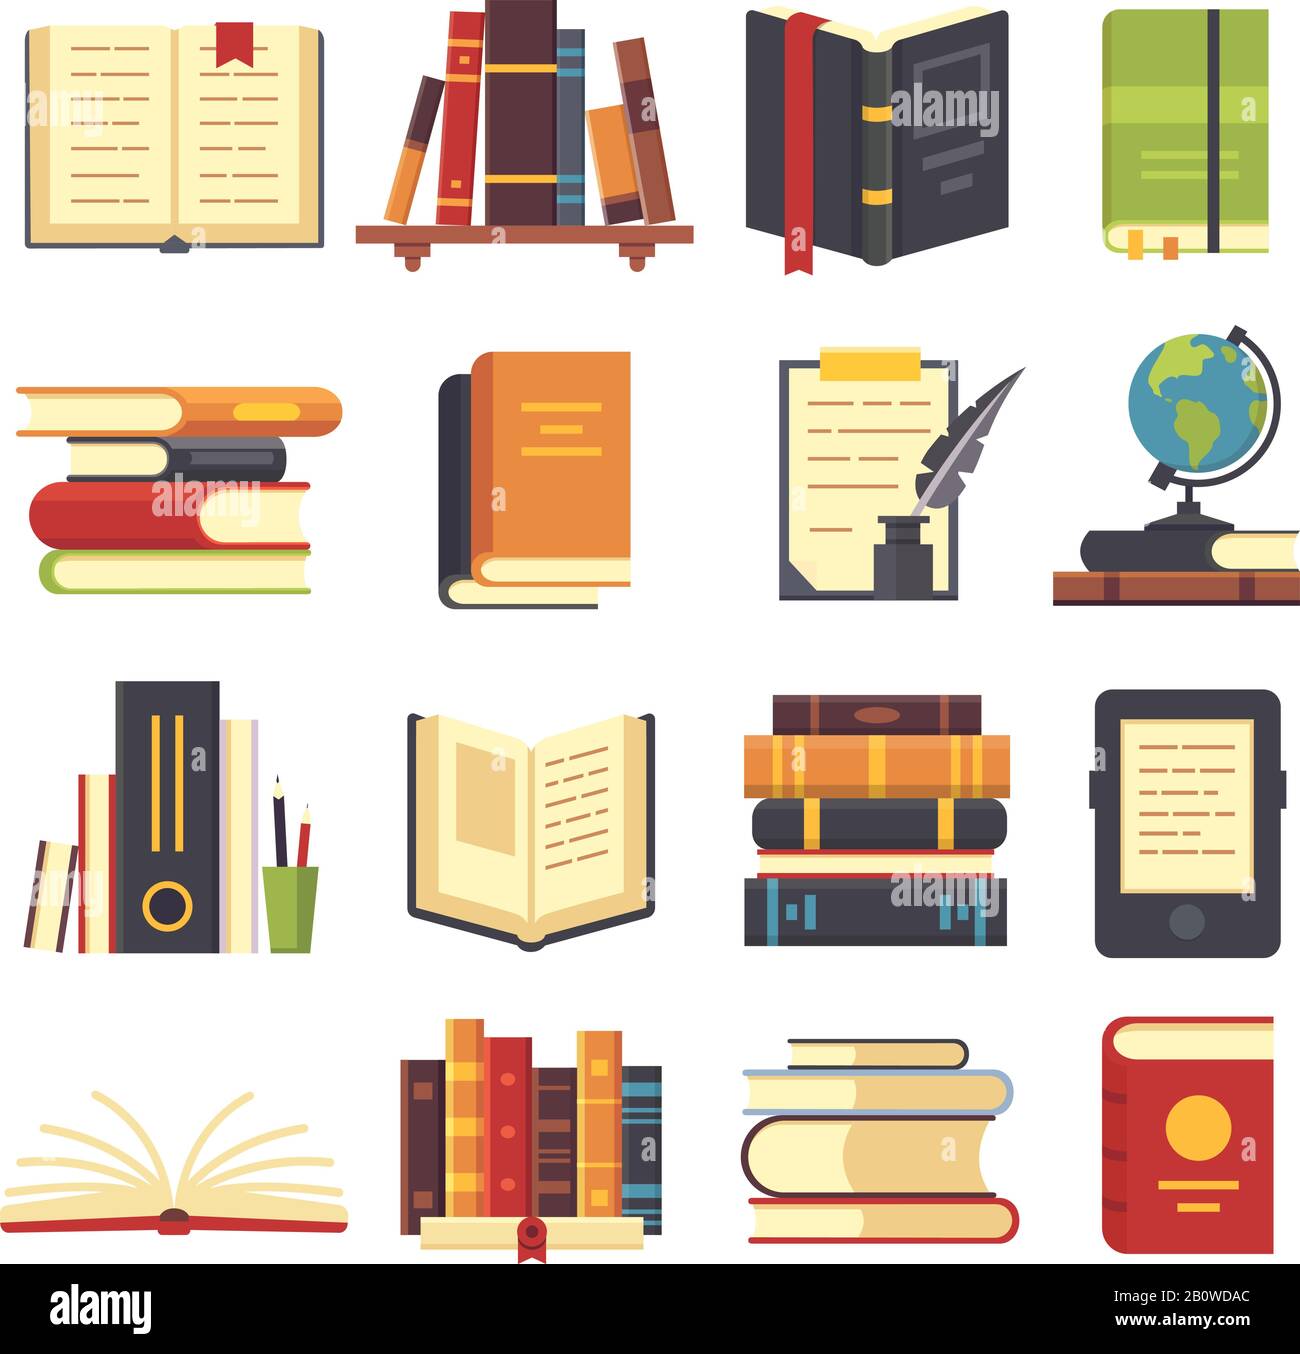 Flat books icons. Magazines with bookmark, history and open science book stack. Encyclopedia on library shelves vector illustration Stock Vector